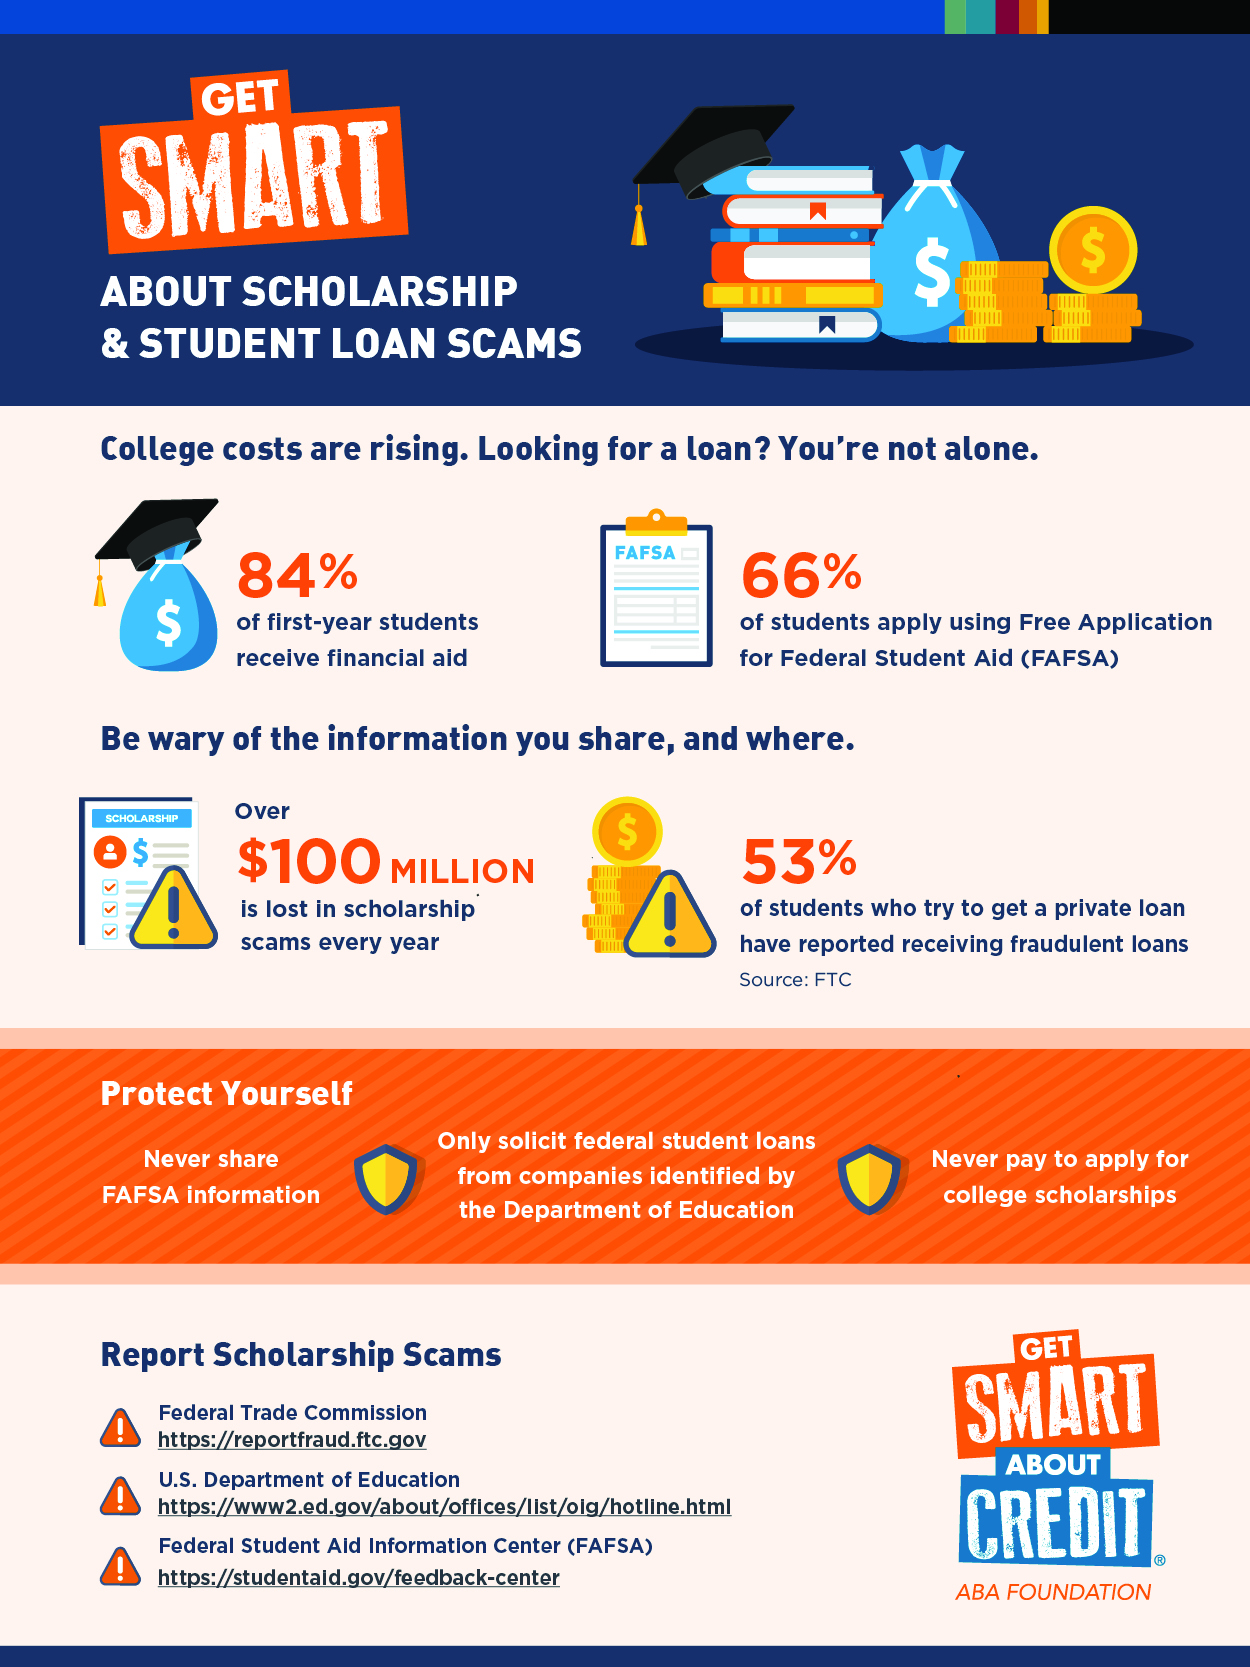 Get Smart about Scholarships and Student Loan Scams Infographic